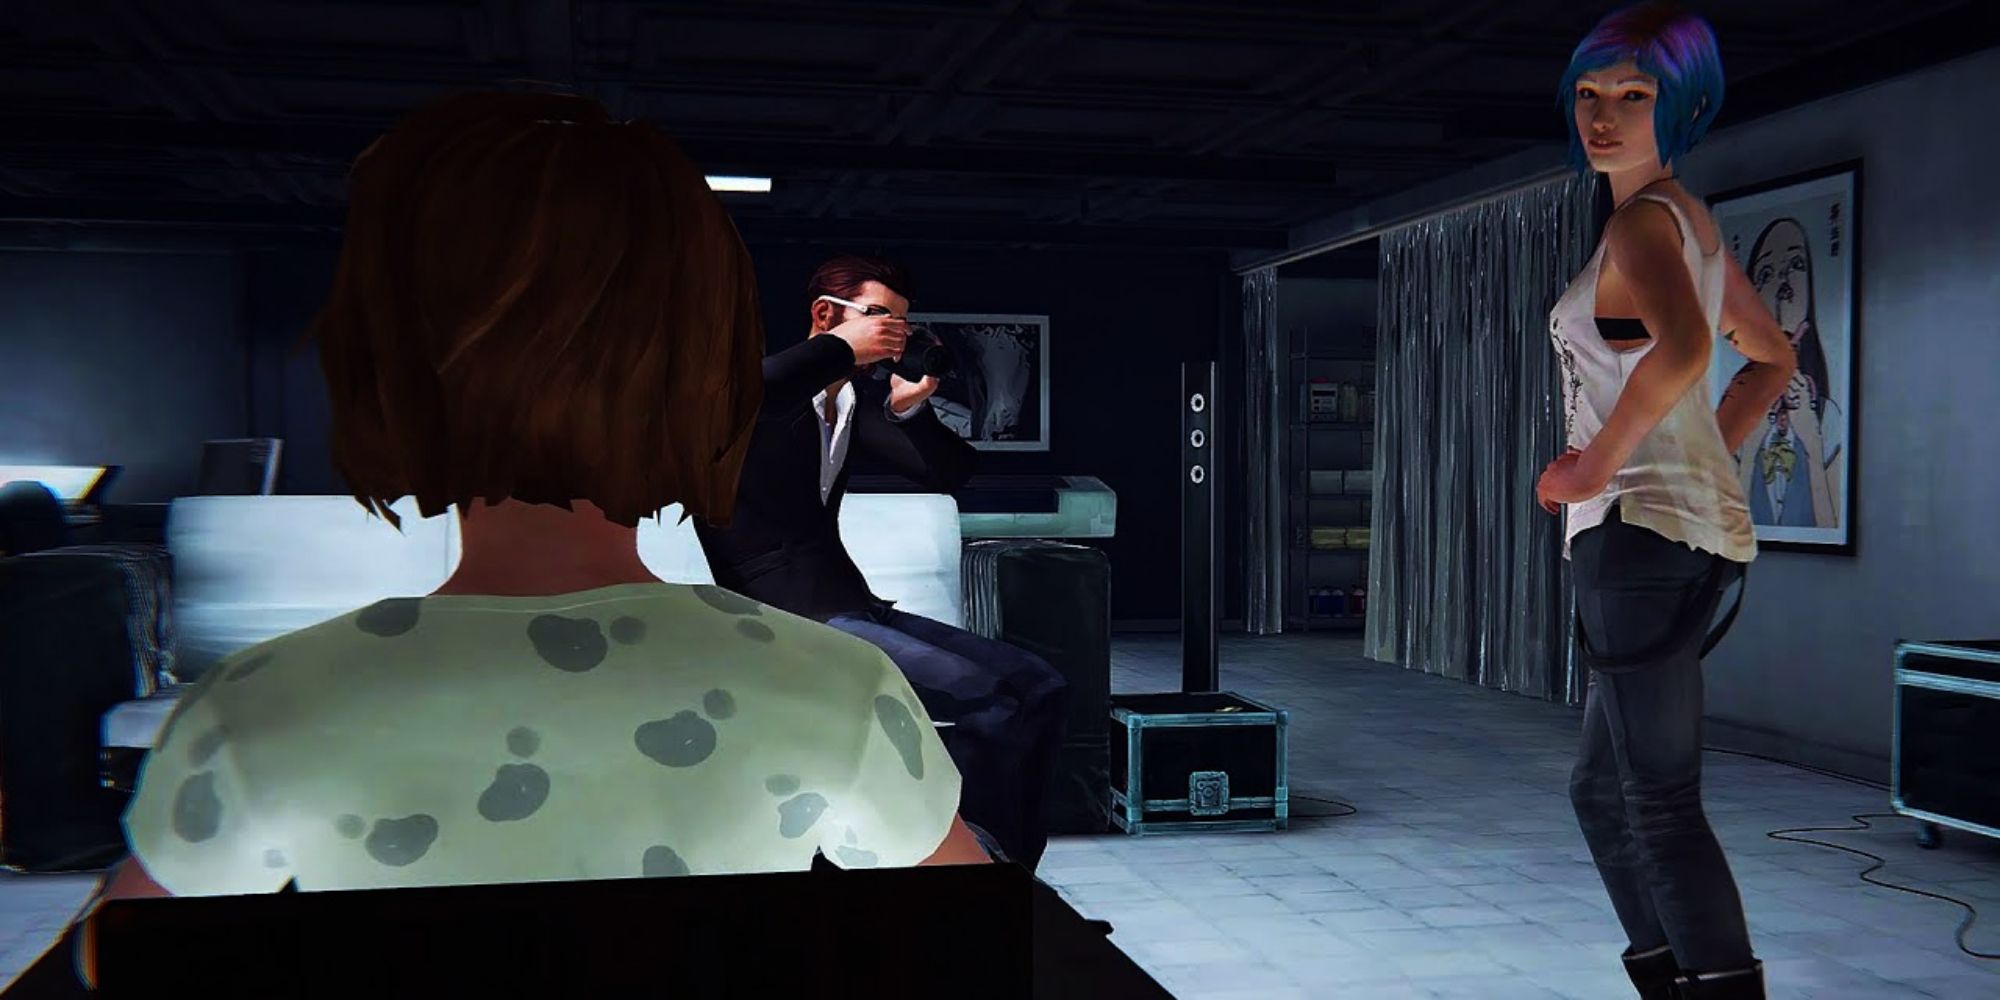 Life Is Strange Nightmare Sequence Screenshot Of Jefferson Taking Photos Of Chloe While Max Is Watching